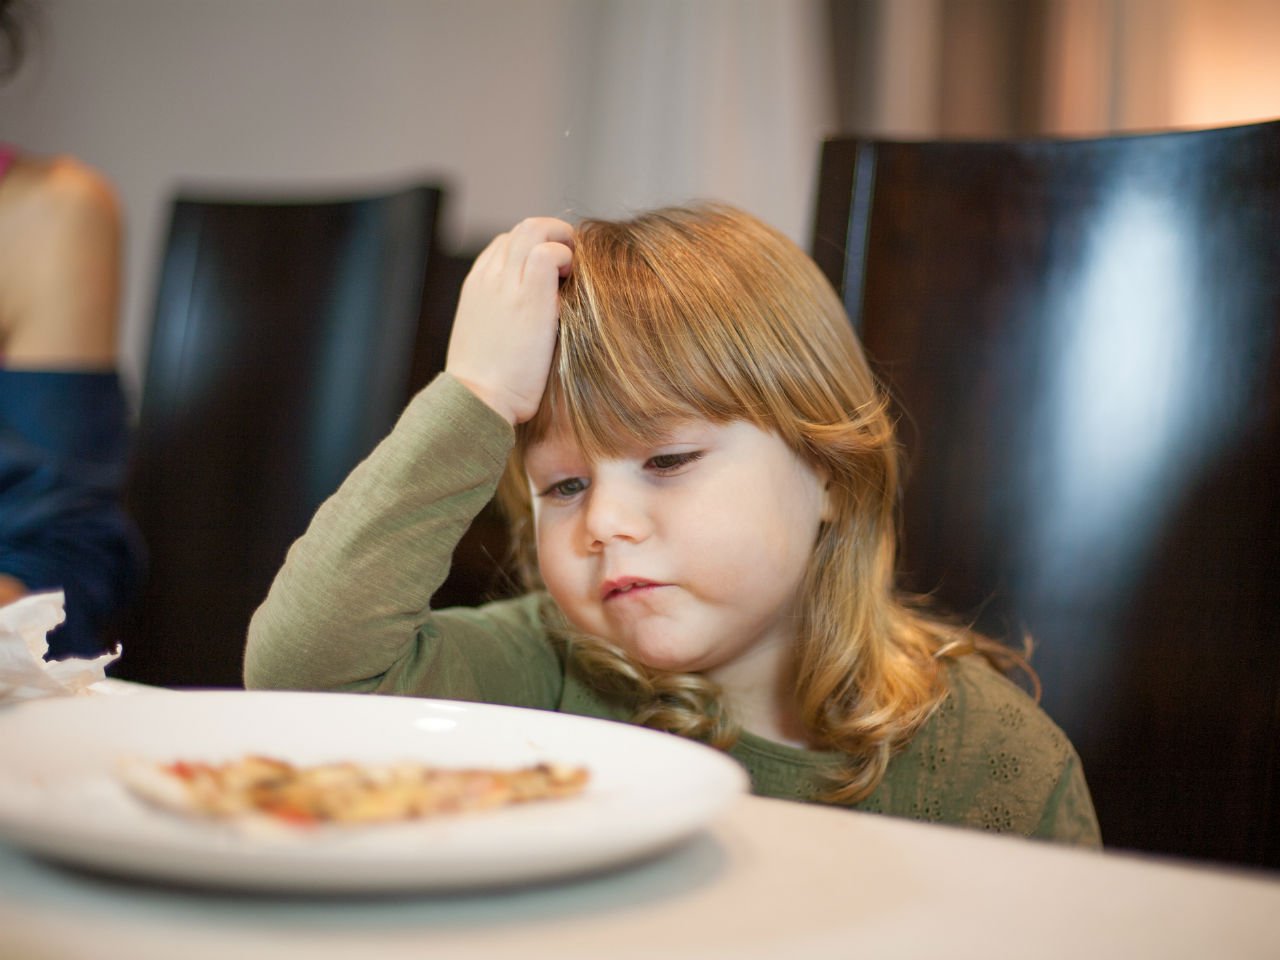 A young girl pouts at a plate of food on the table in front of her